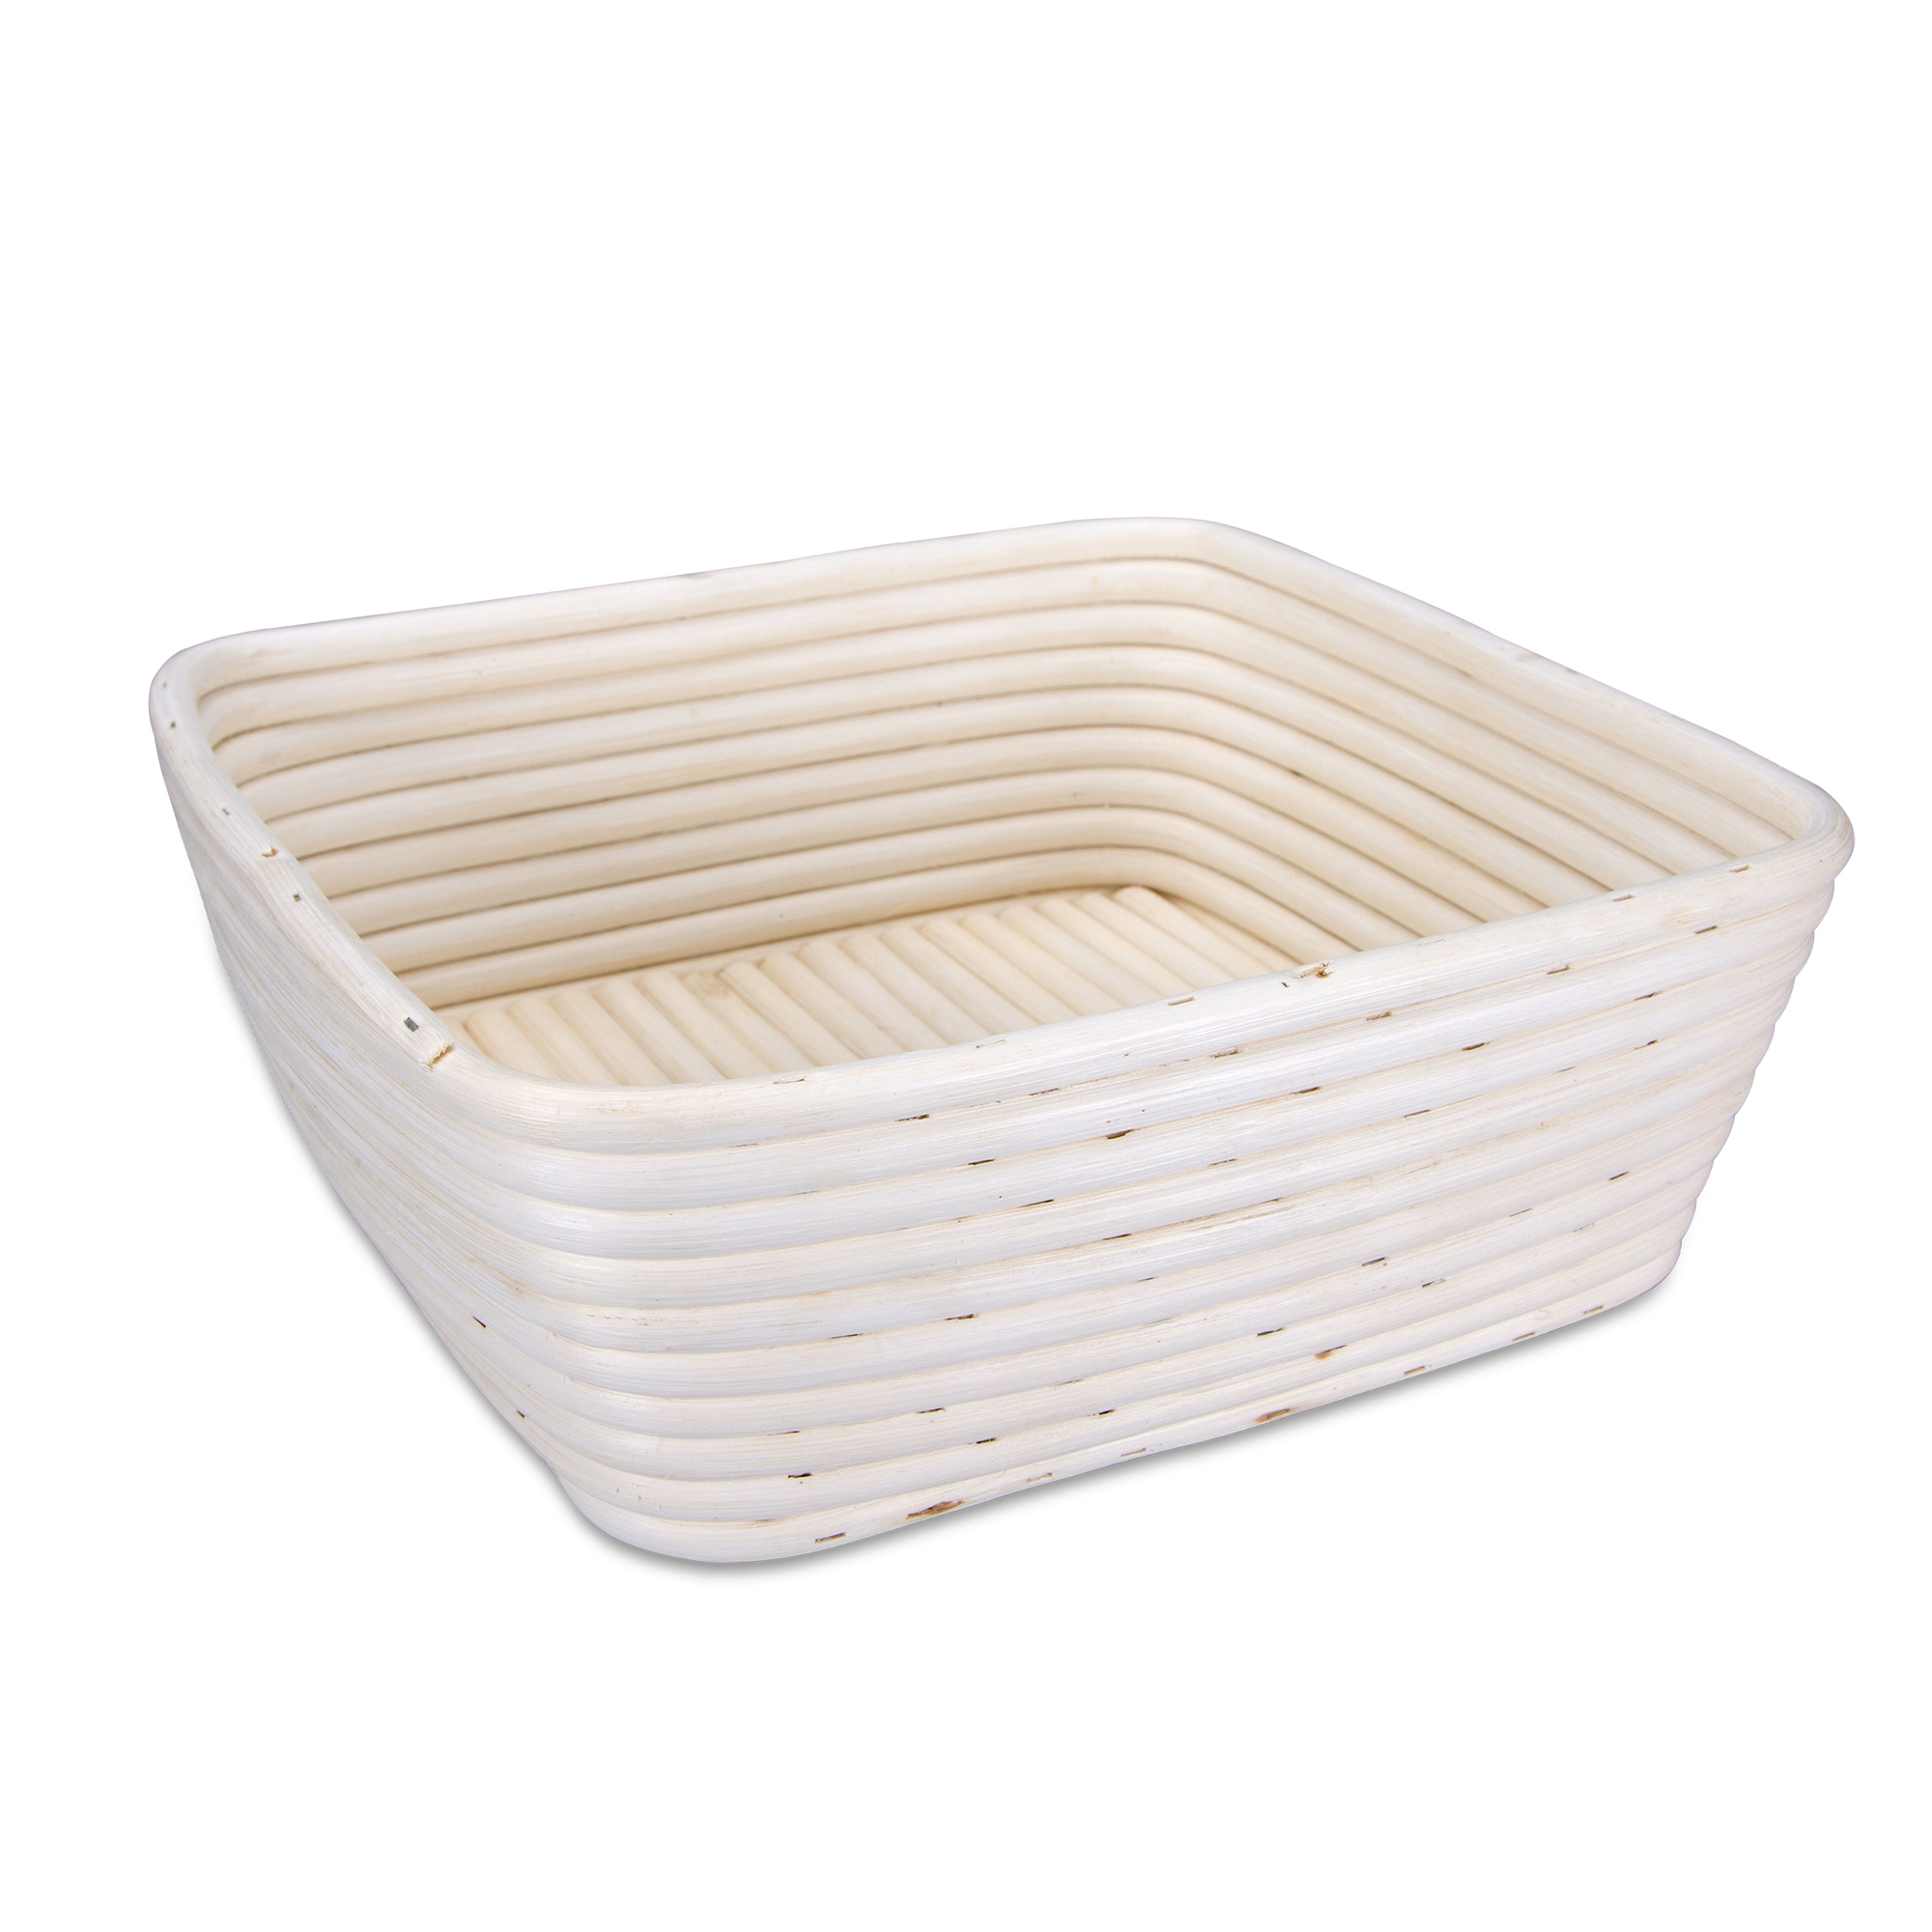 Städter - Proofing basket square with linen cover, rattan 25 x 25 cm / H 8.5 cm